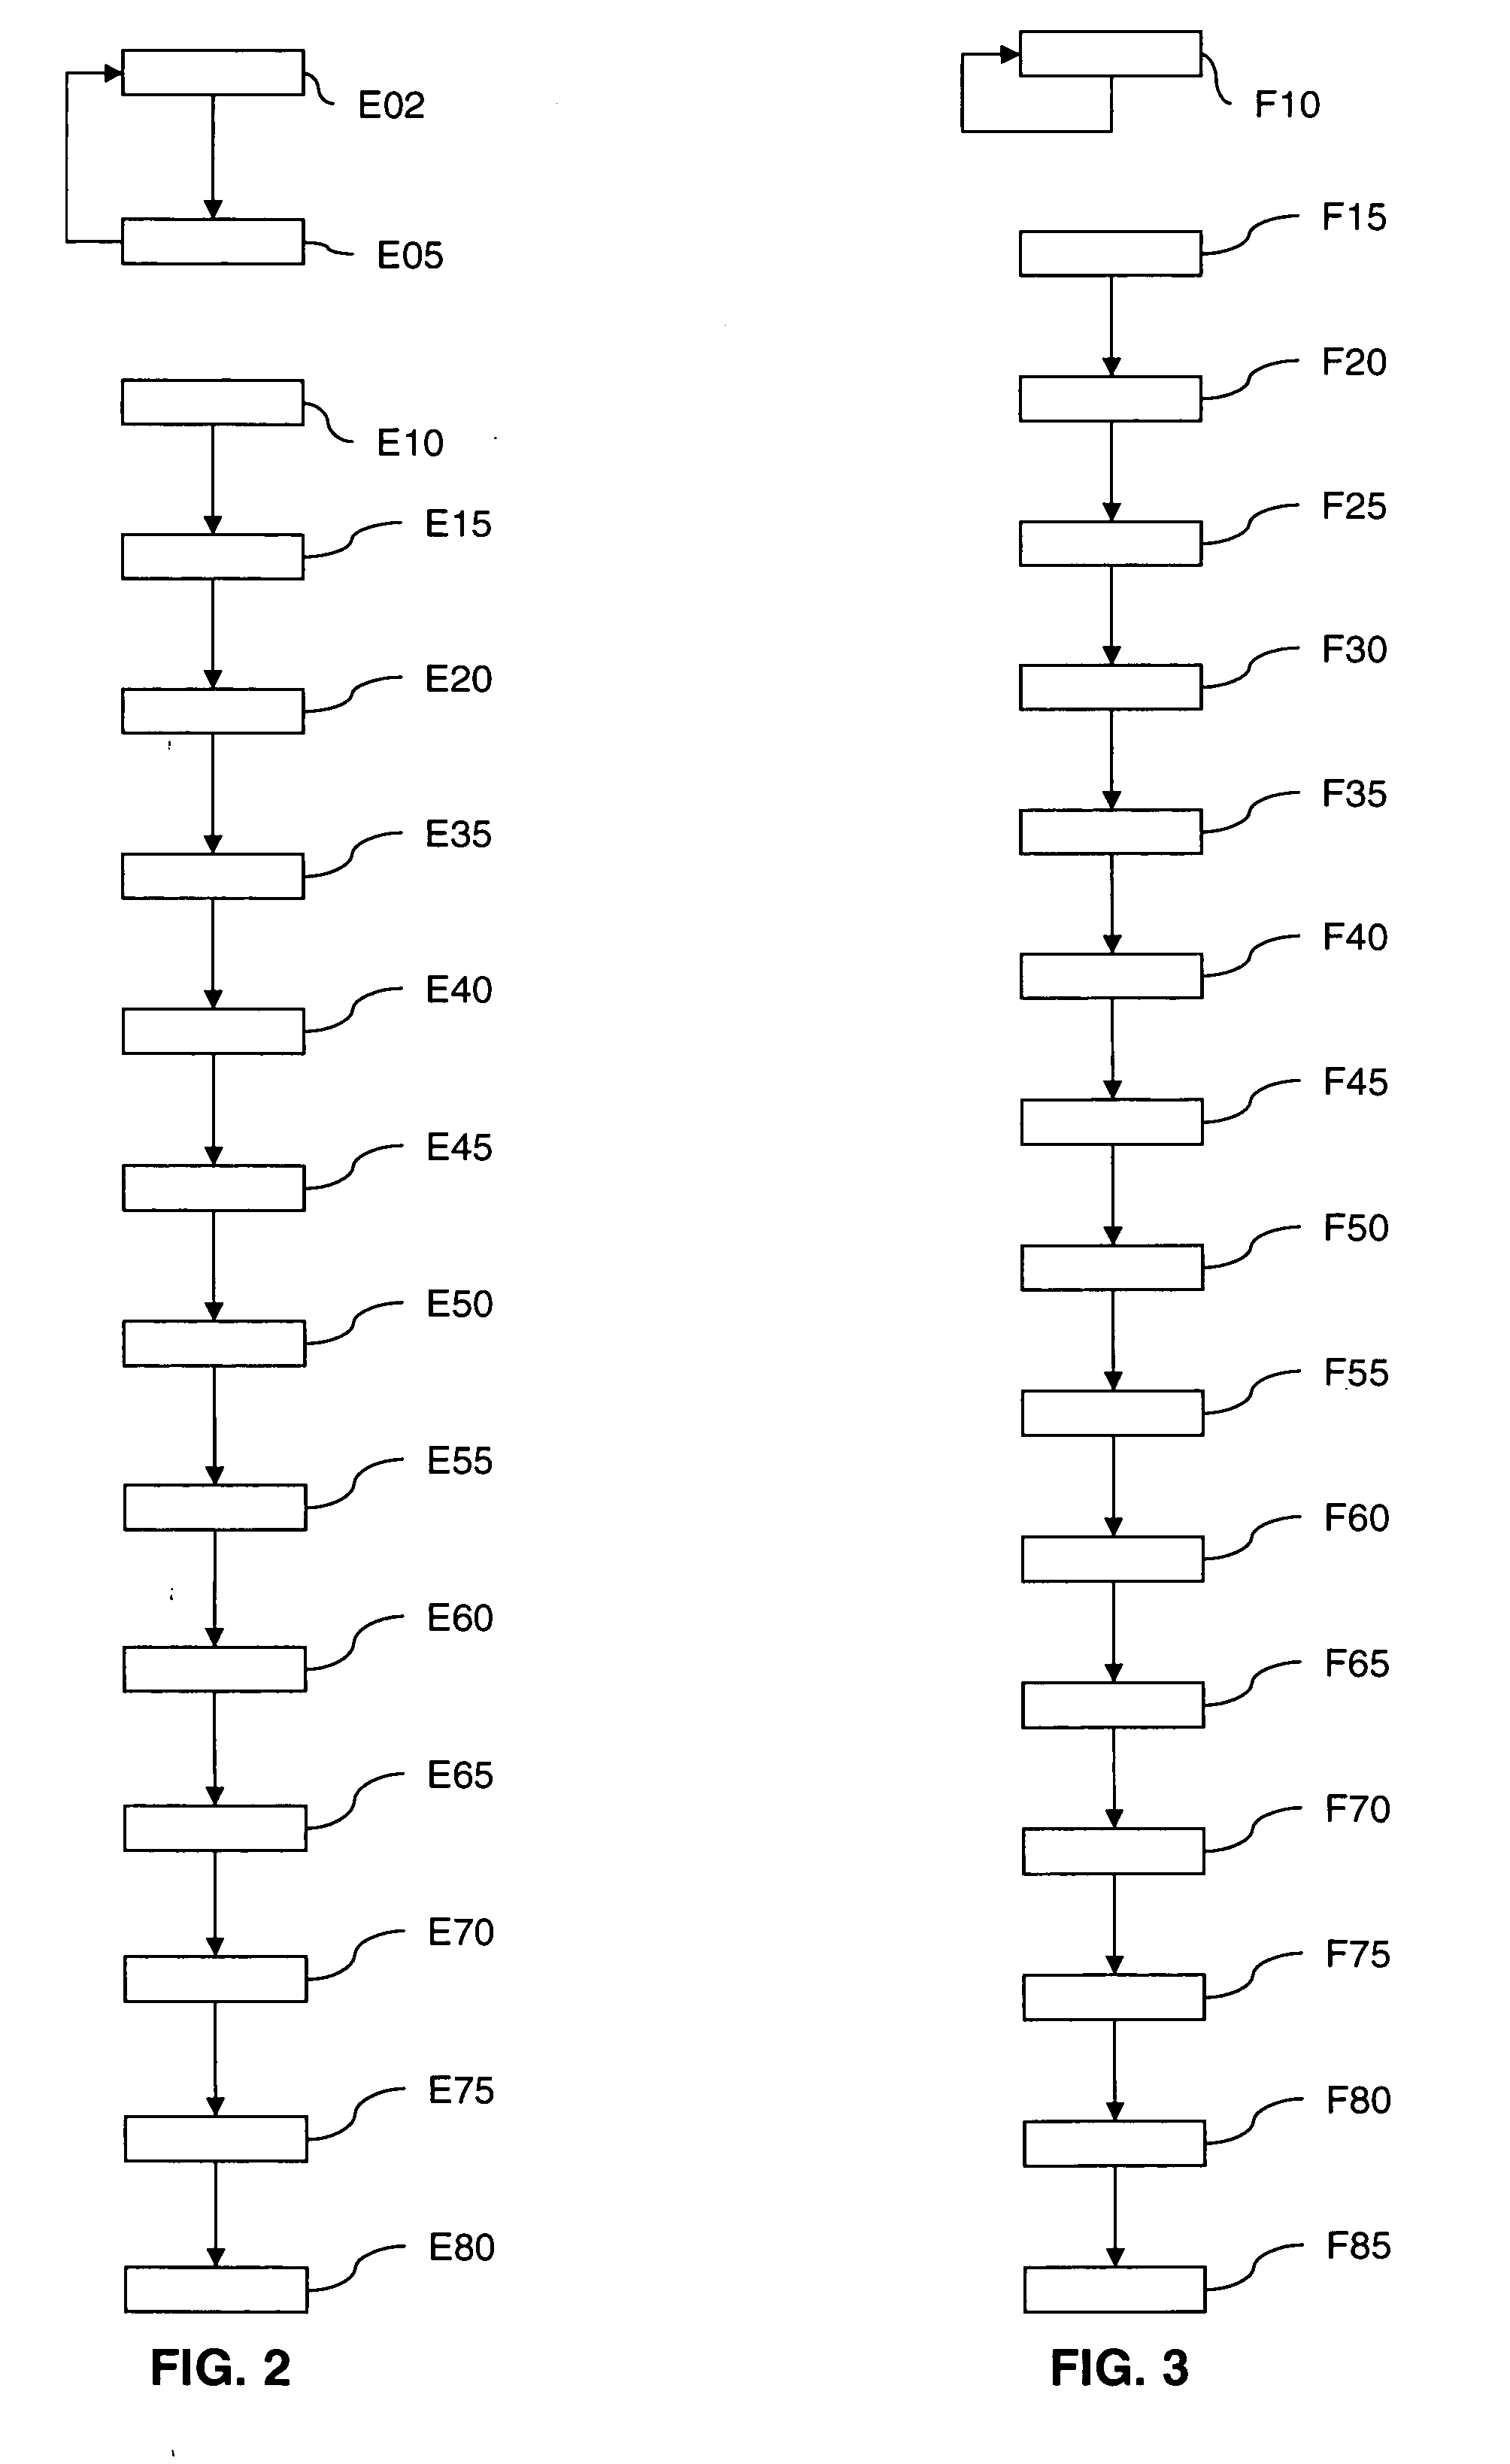 Method for Managing Messages In a Peer-To-Peer Network